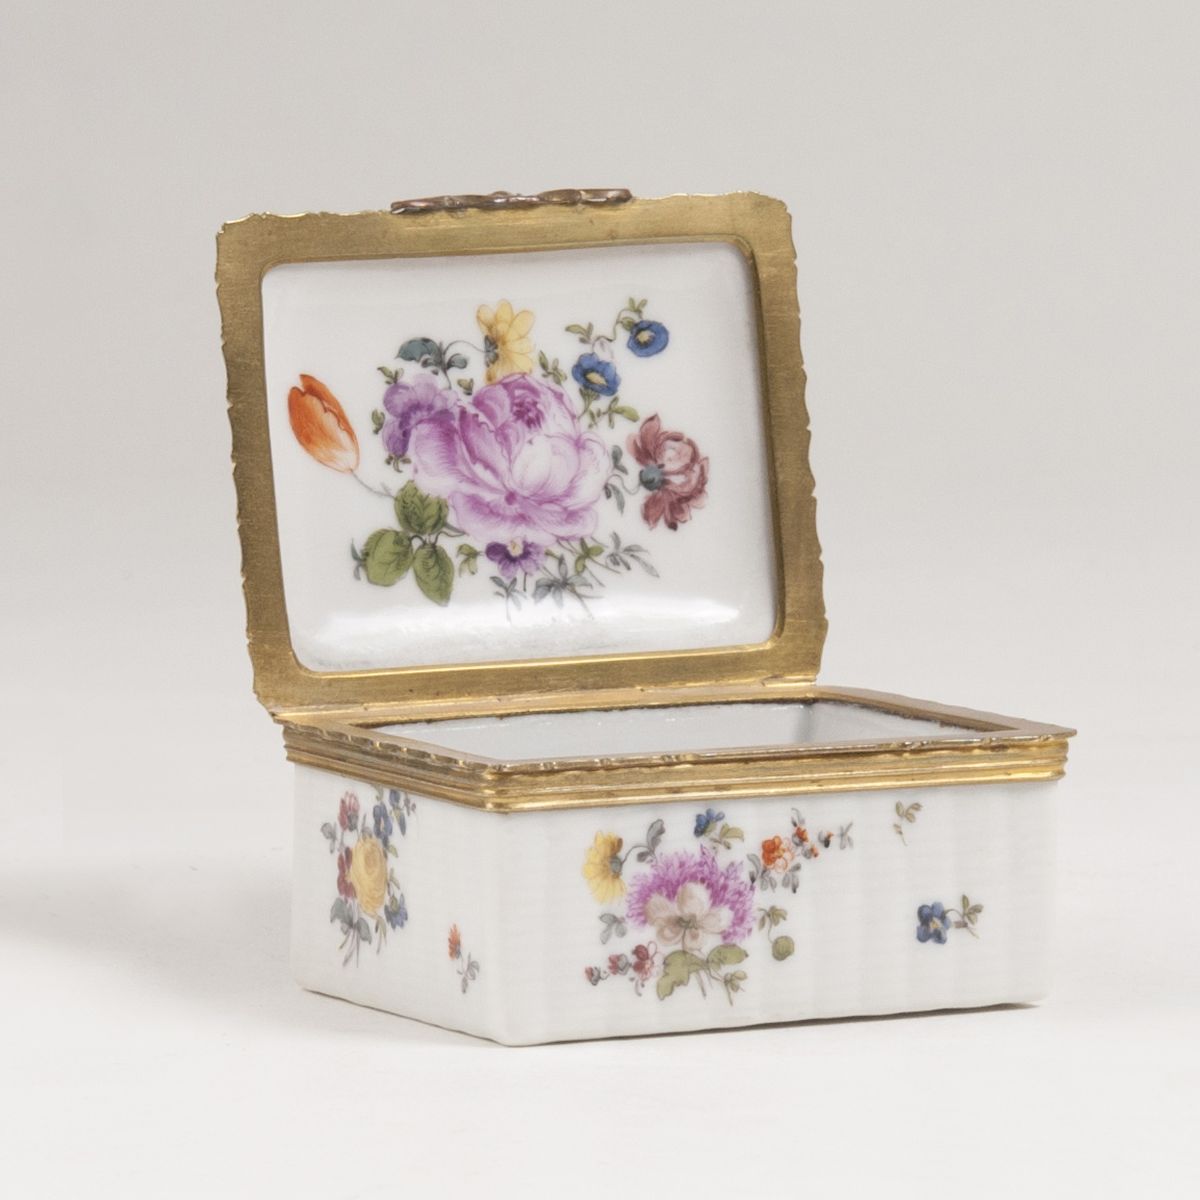 A Small Snuff Box with Flowers and ozier relief